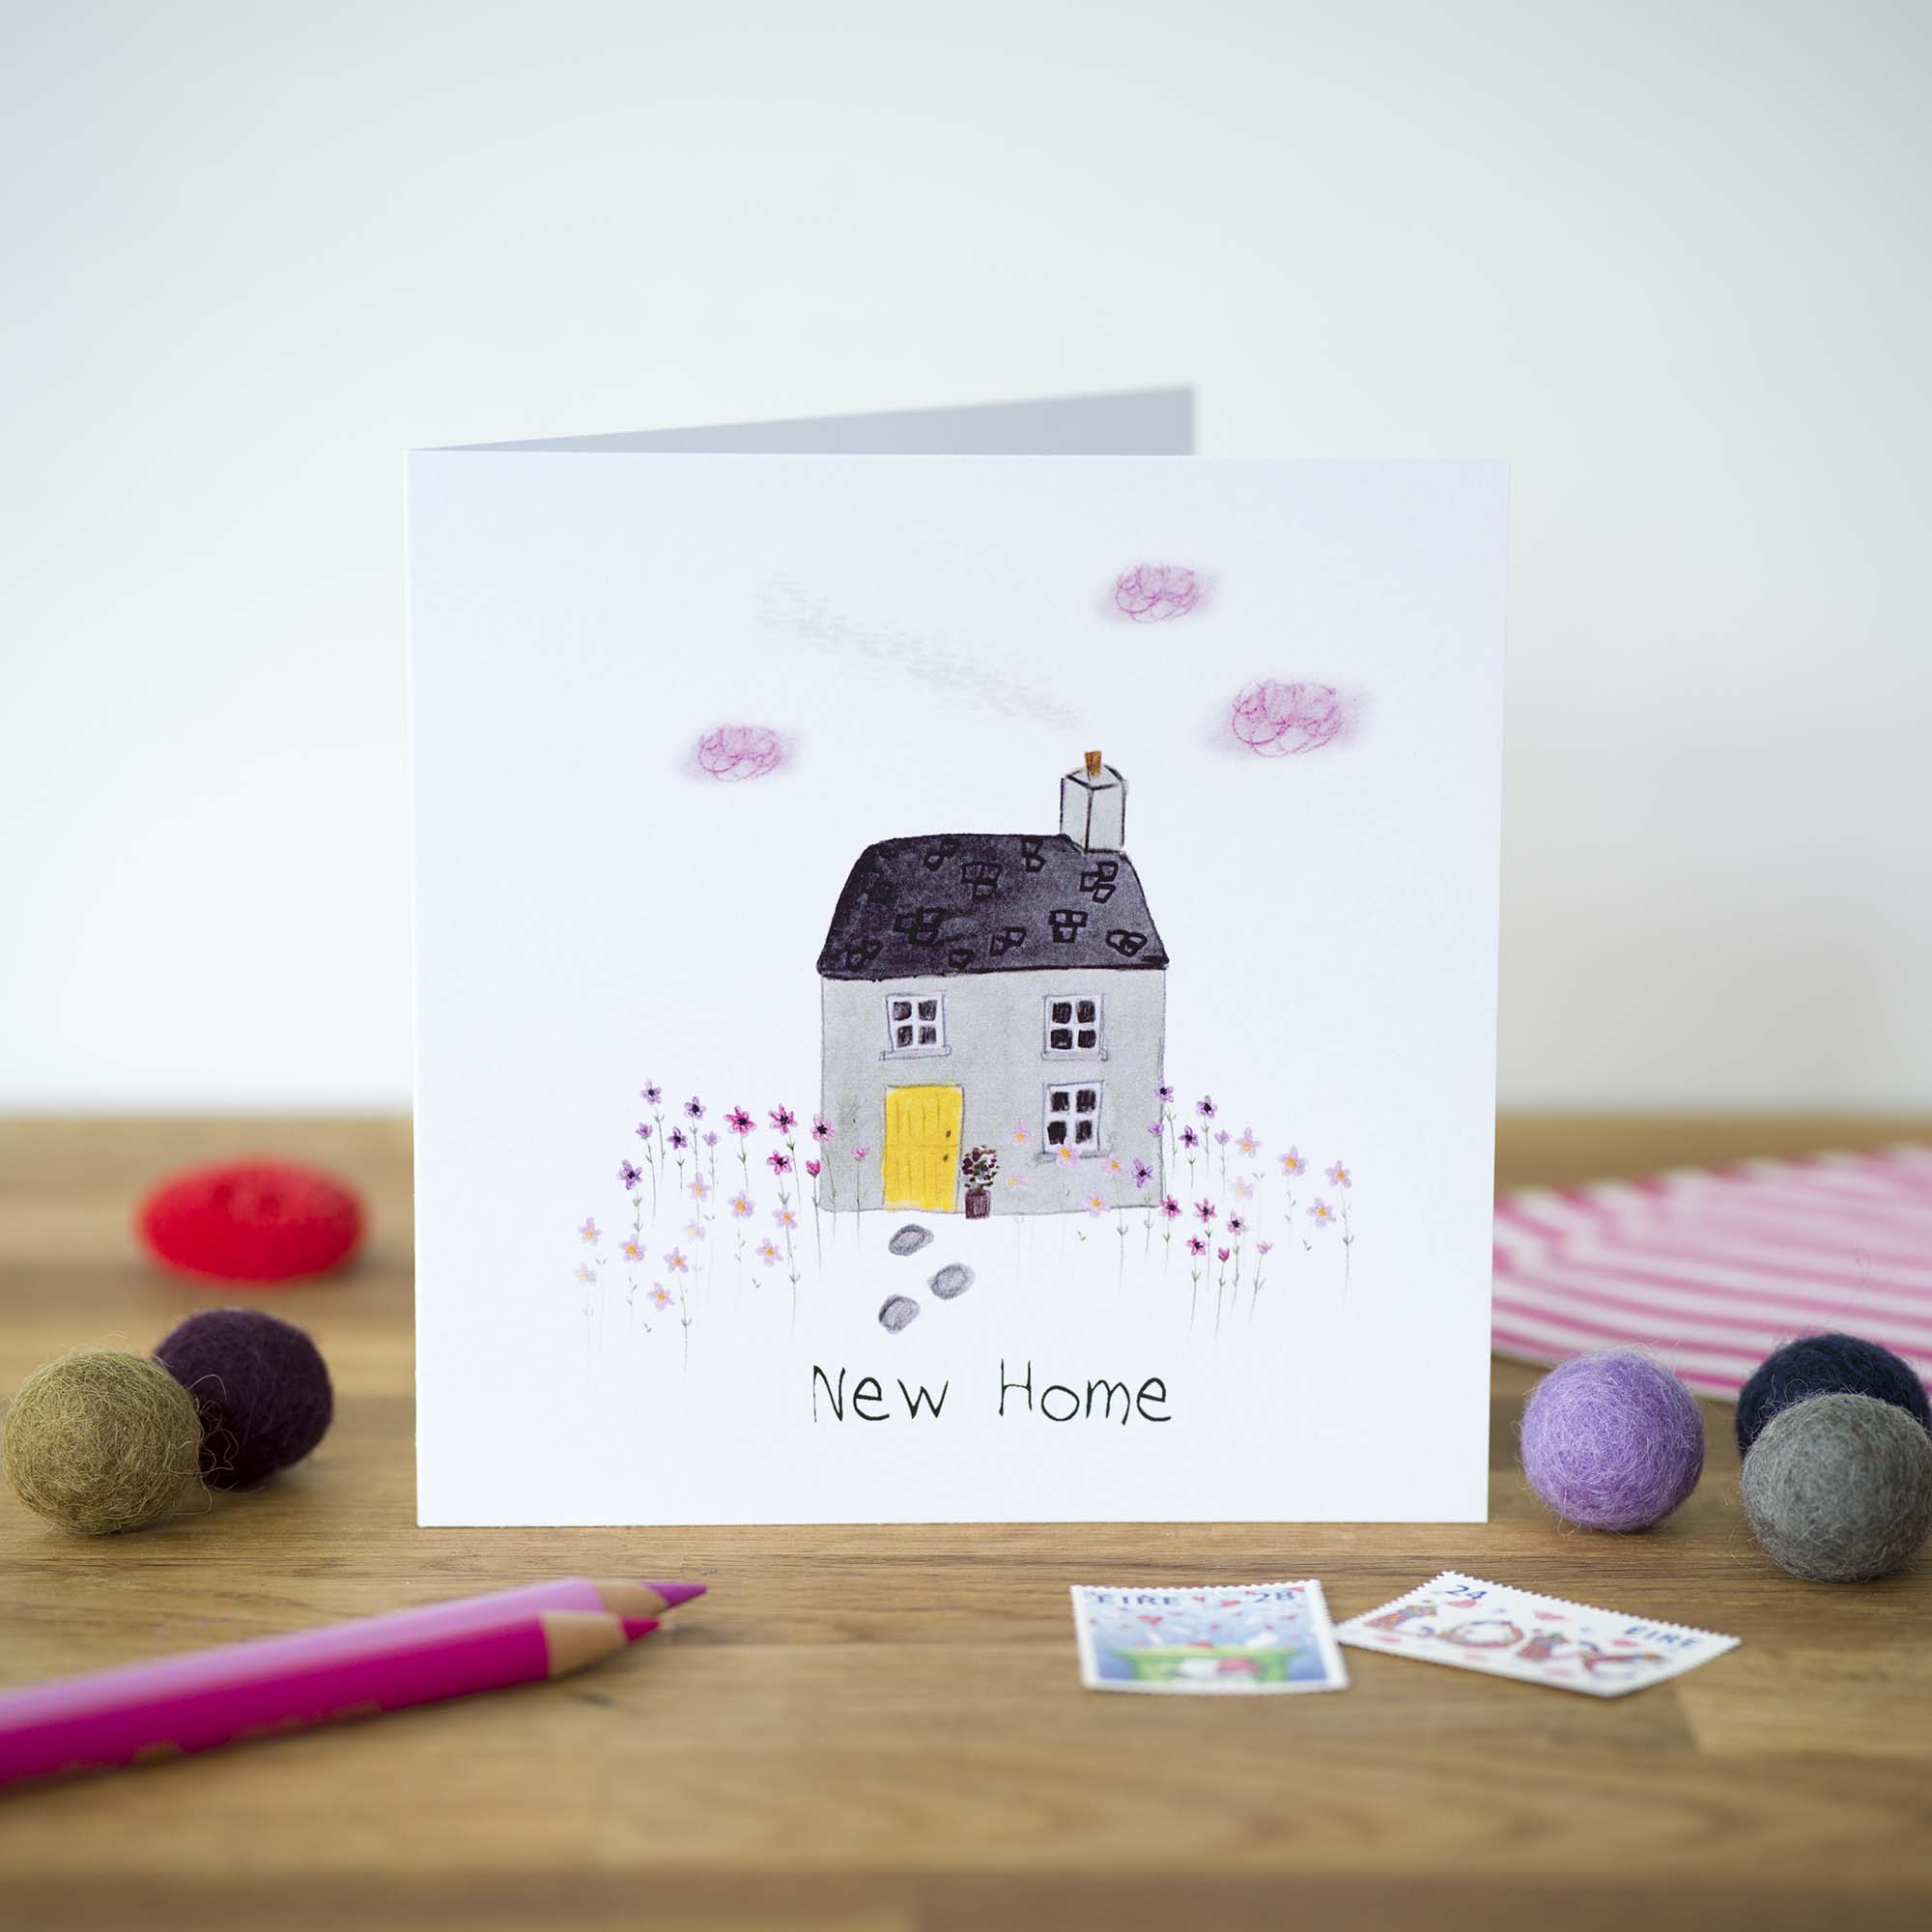 Pear Shaped Studio "New Home" Greeting Card